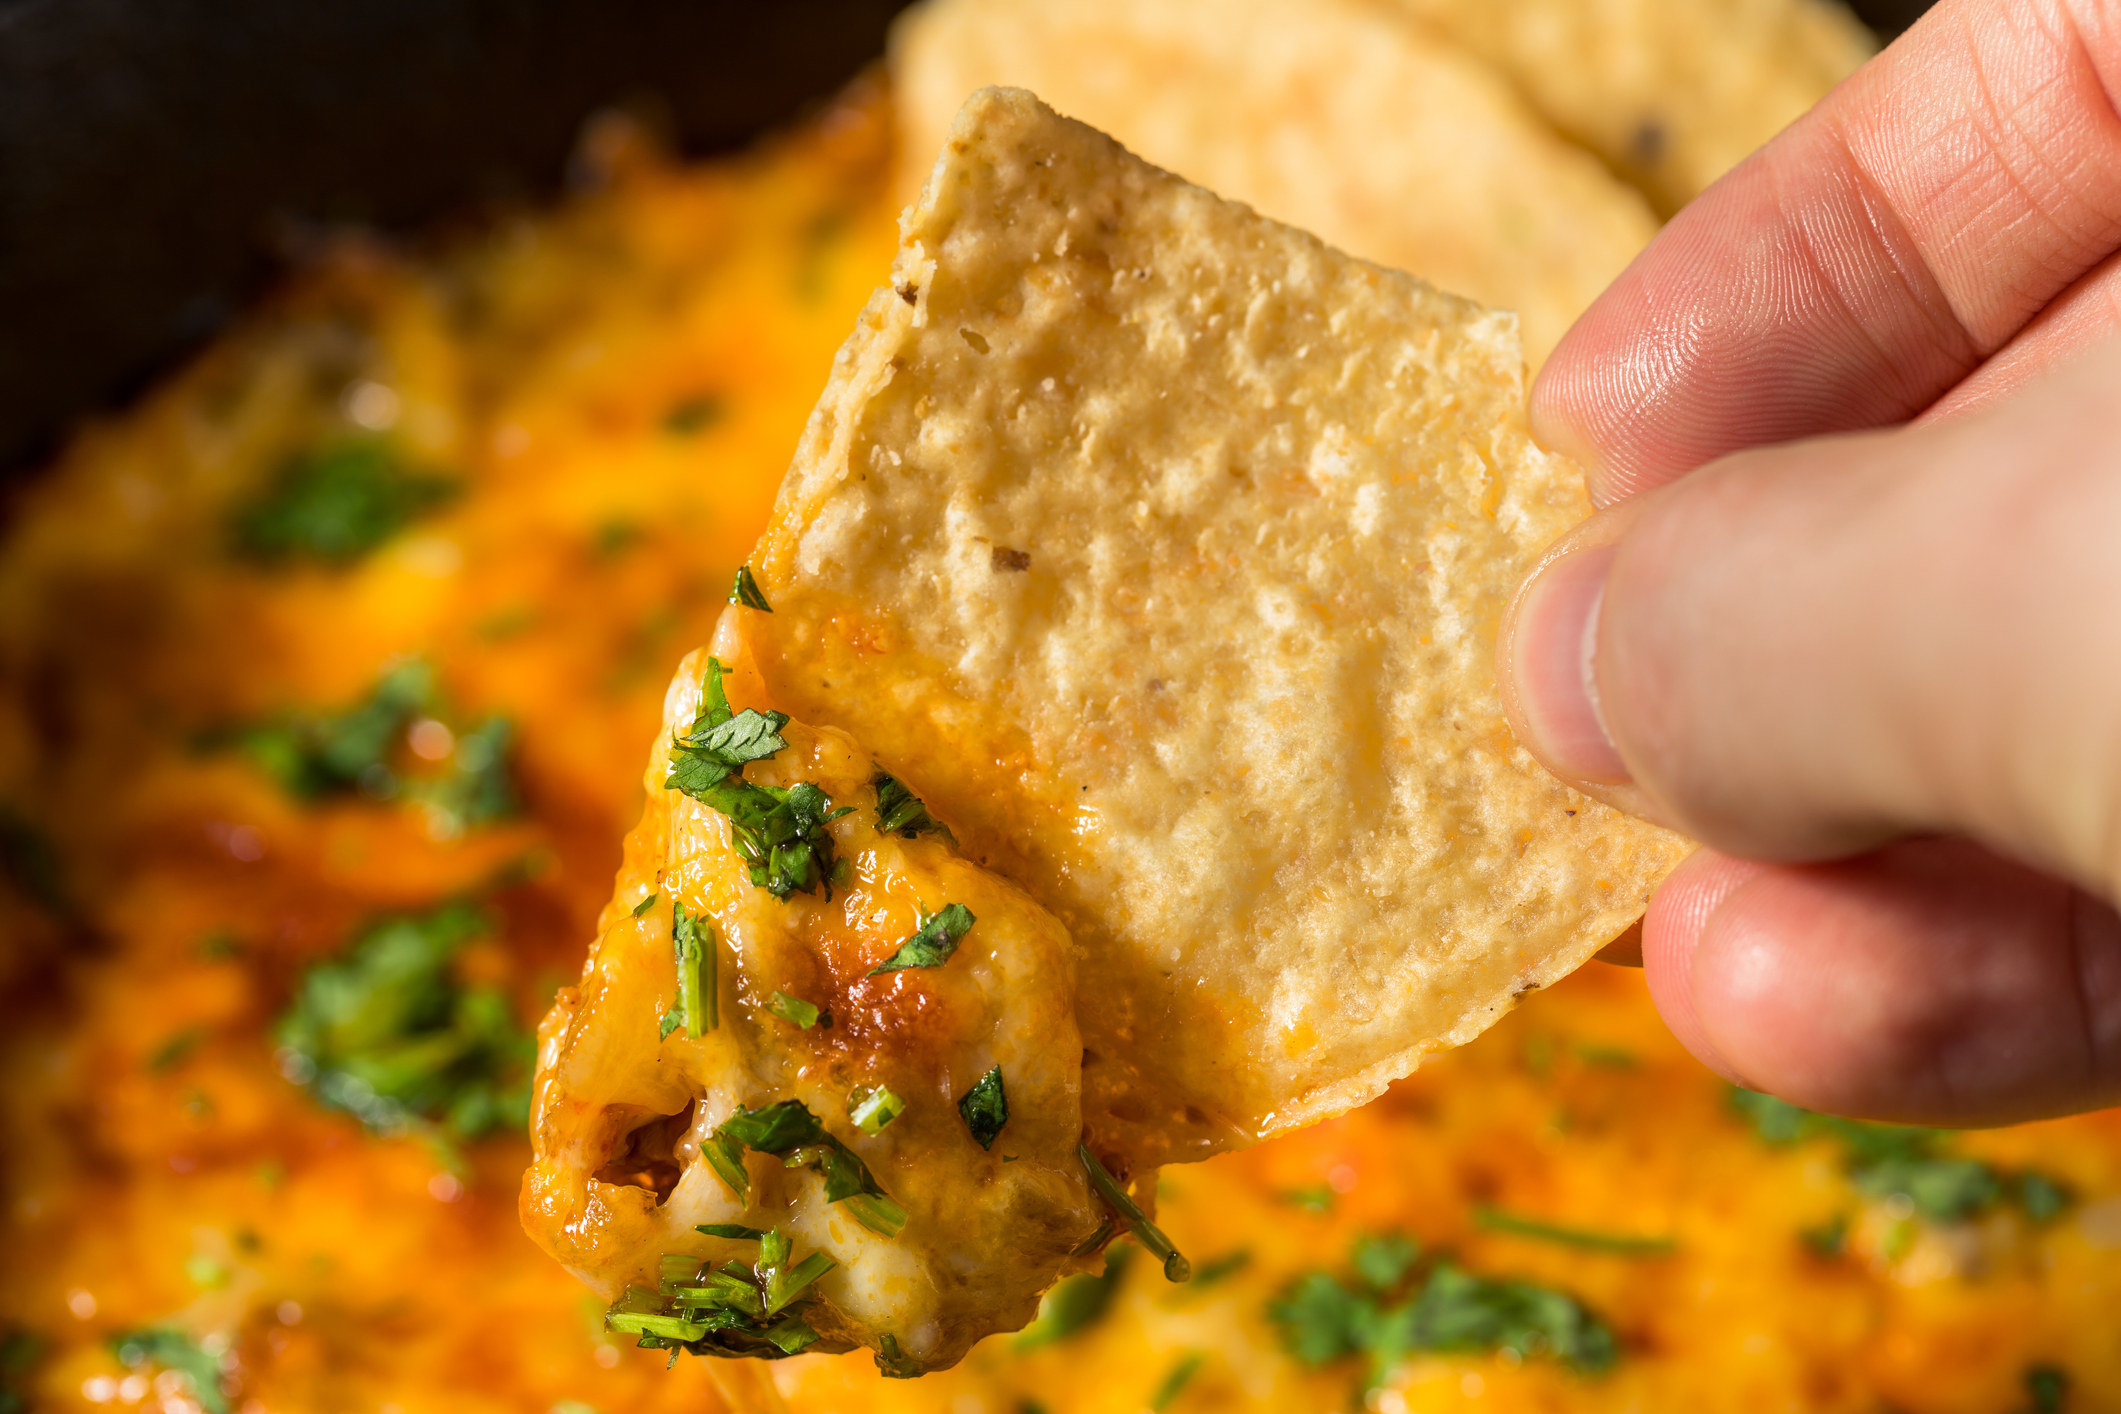 Dipping a chip into queso.